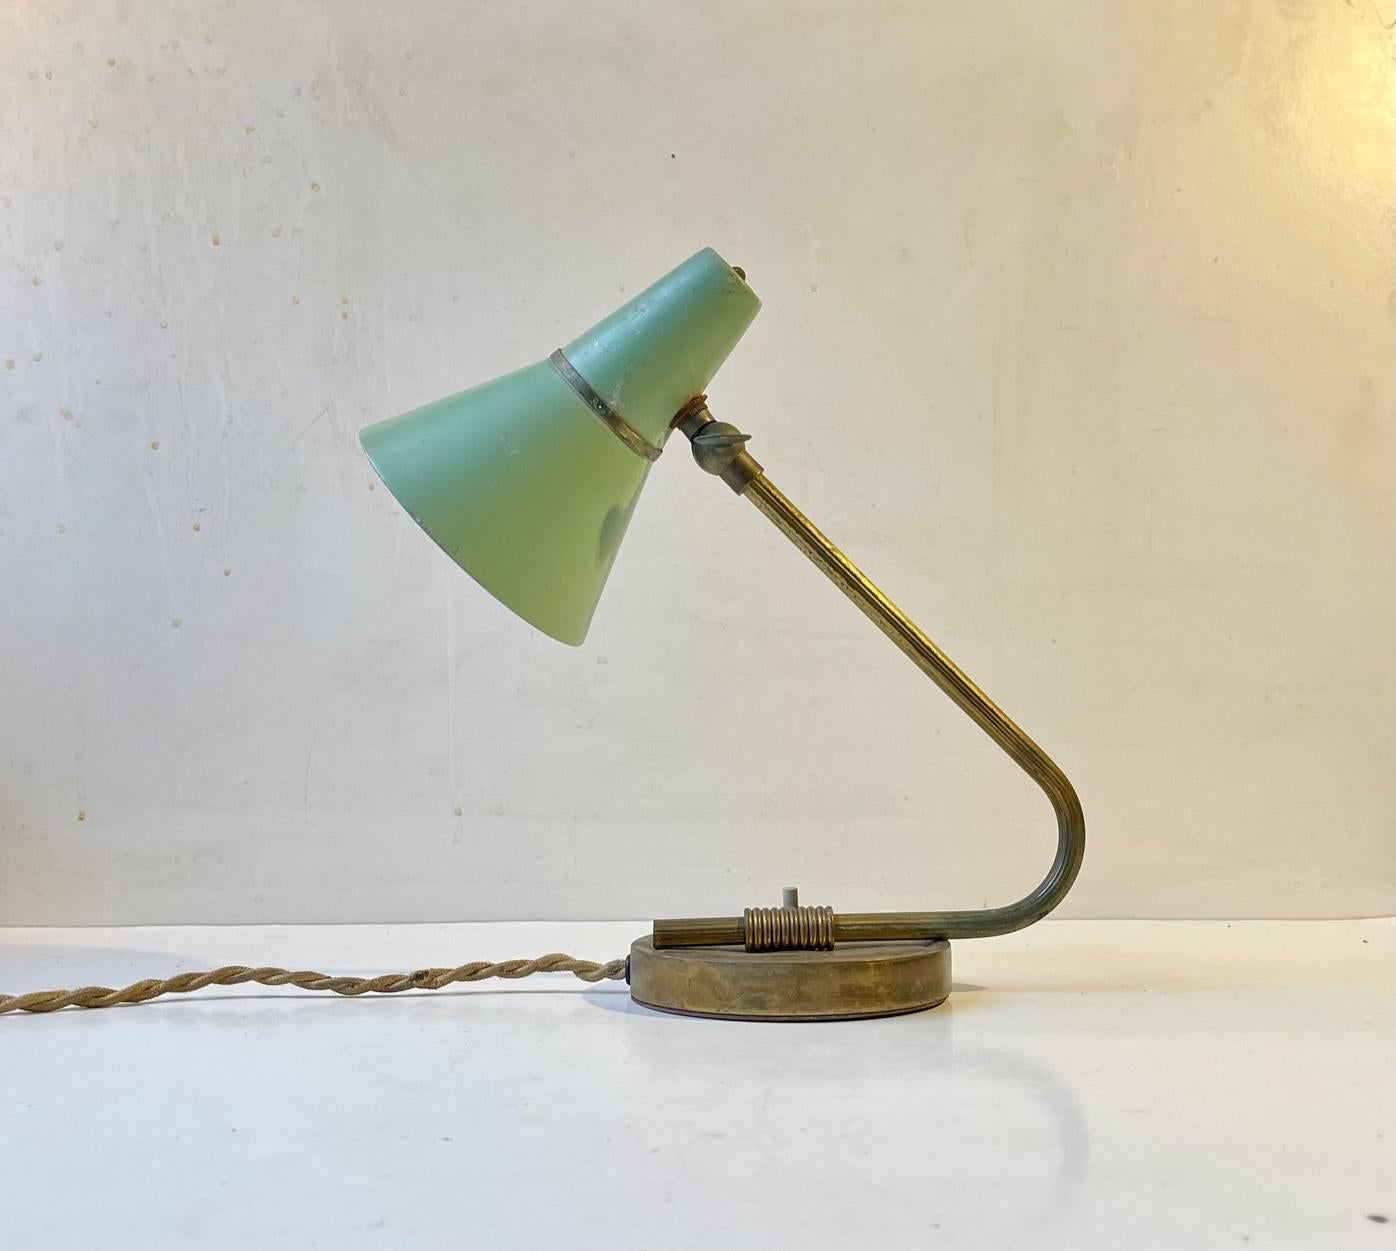 Adjustable Wall lamp made from brass and aluminium. It features a pastel green shade with brass band. It was made in Scandinavia during the 1950s, probably by ASEA or Falkenberg. Working order. Measurements: Height/dept: 25 cm, Diameter: 11 cm